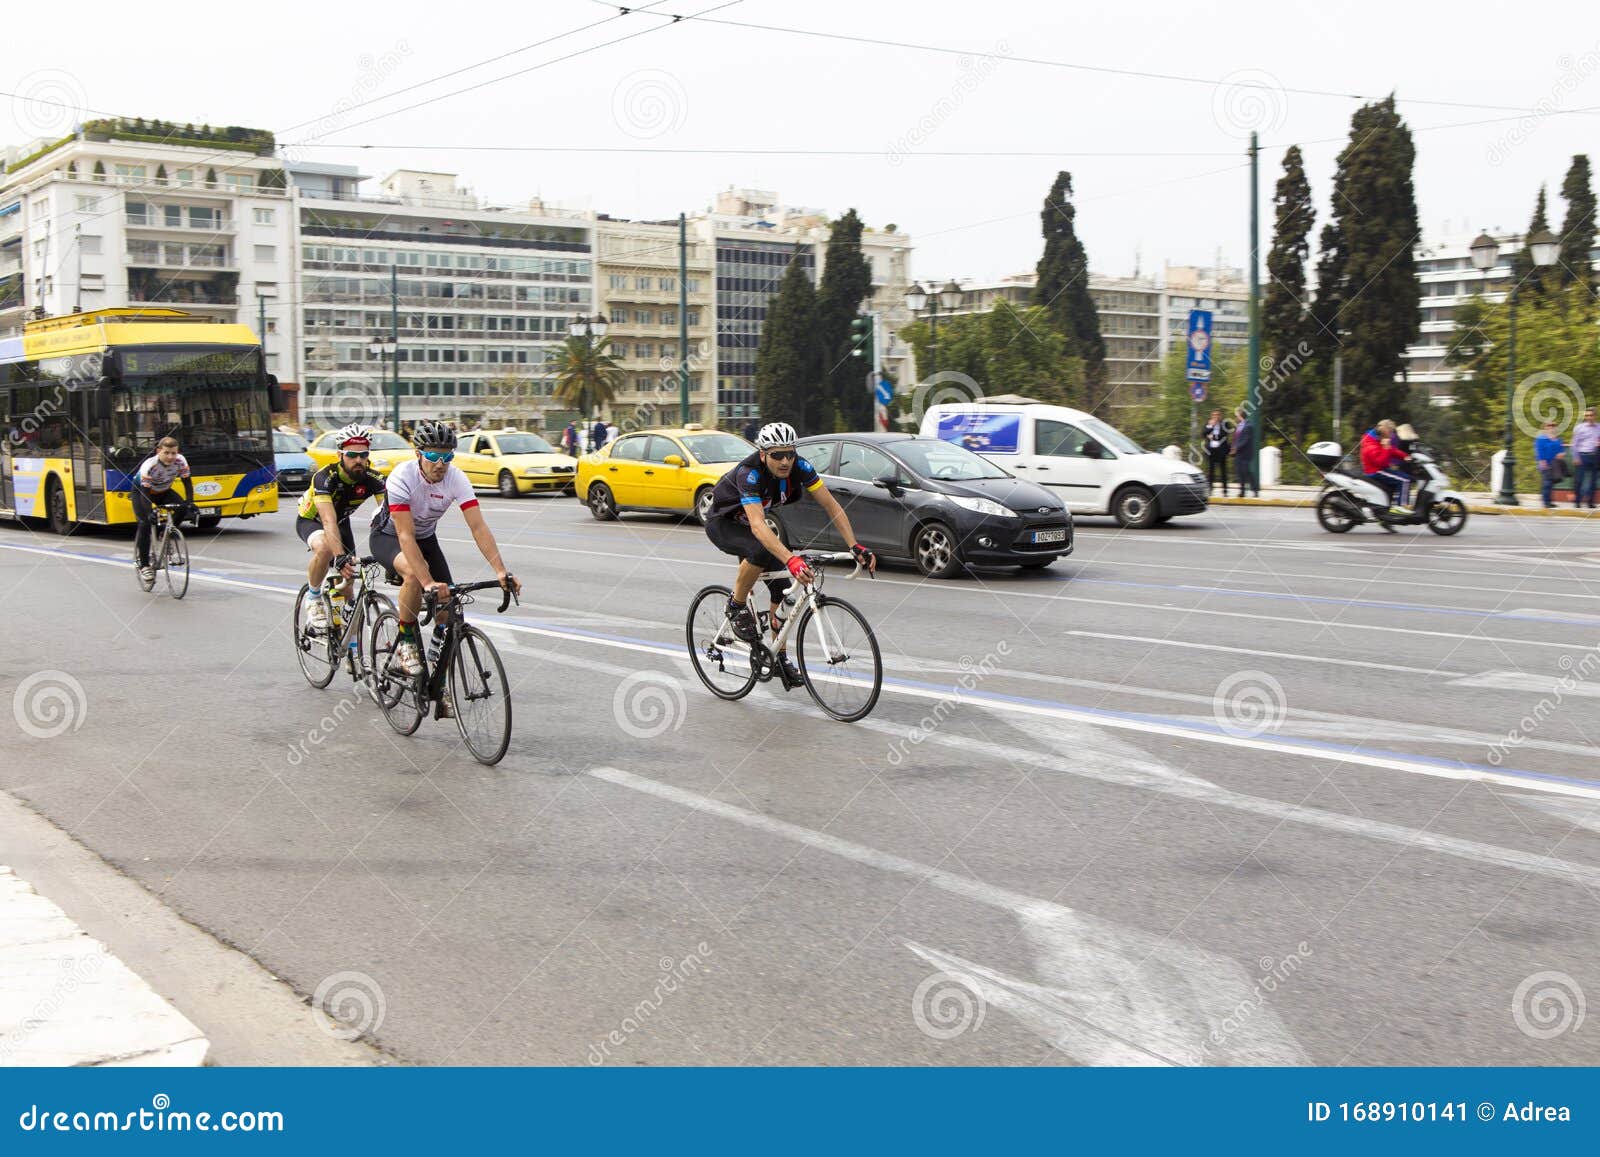 bikers pedaling on the streets of athens city